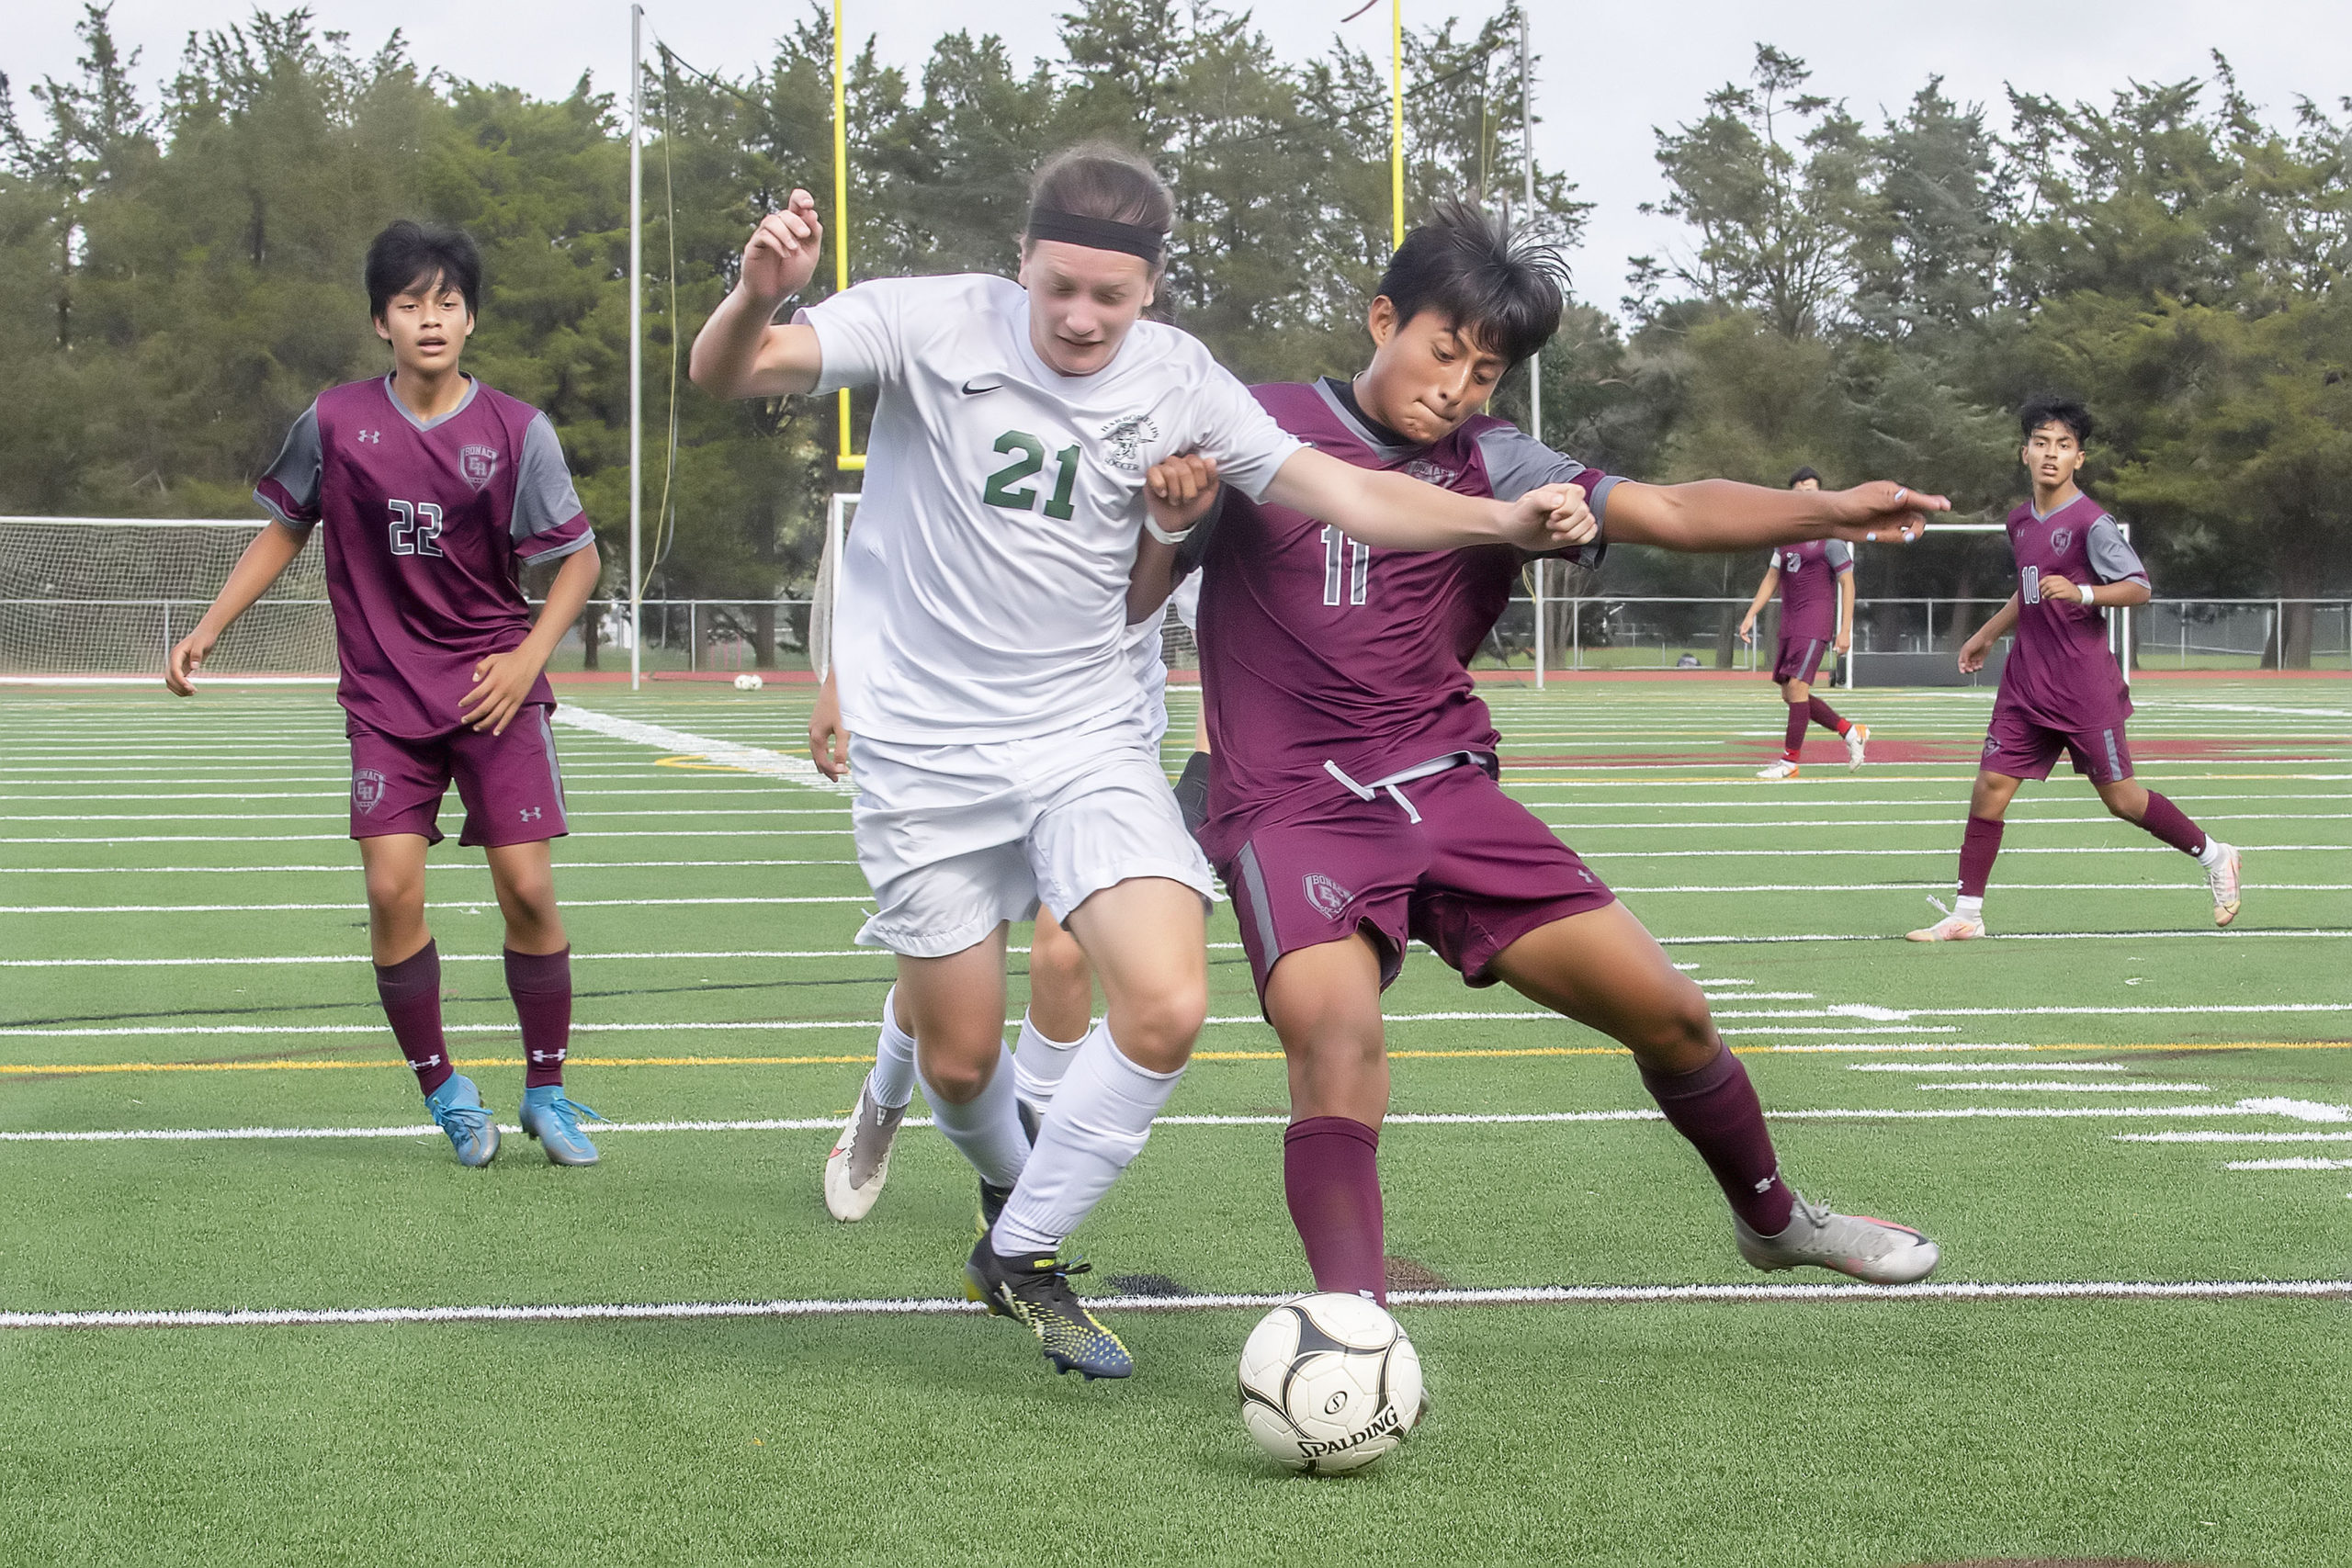 East Hampton's John Quizhpe and a Harborfields player battle for ball control.